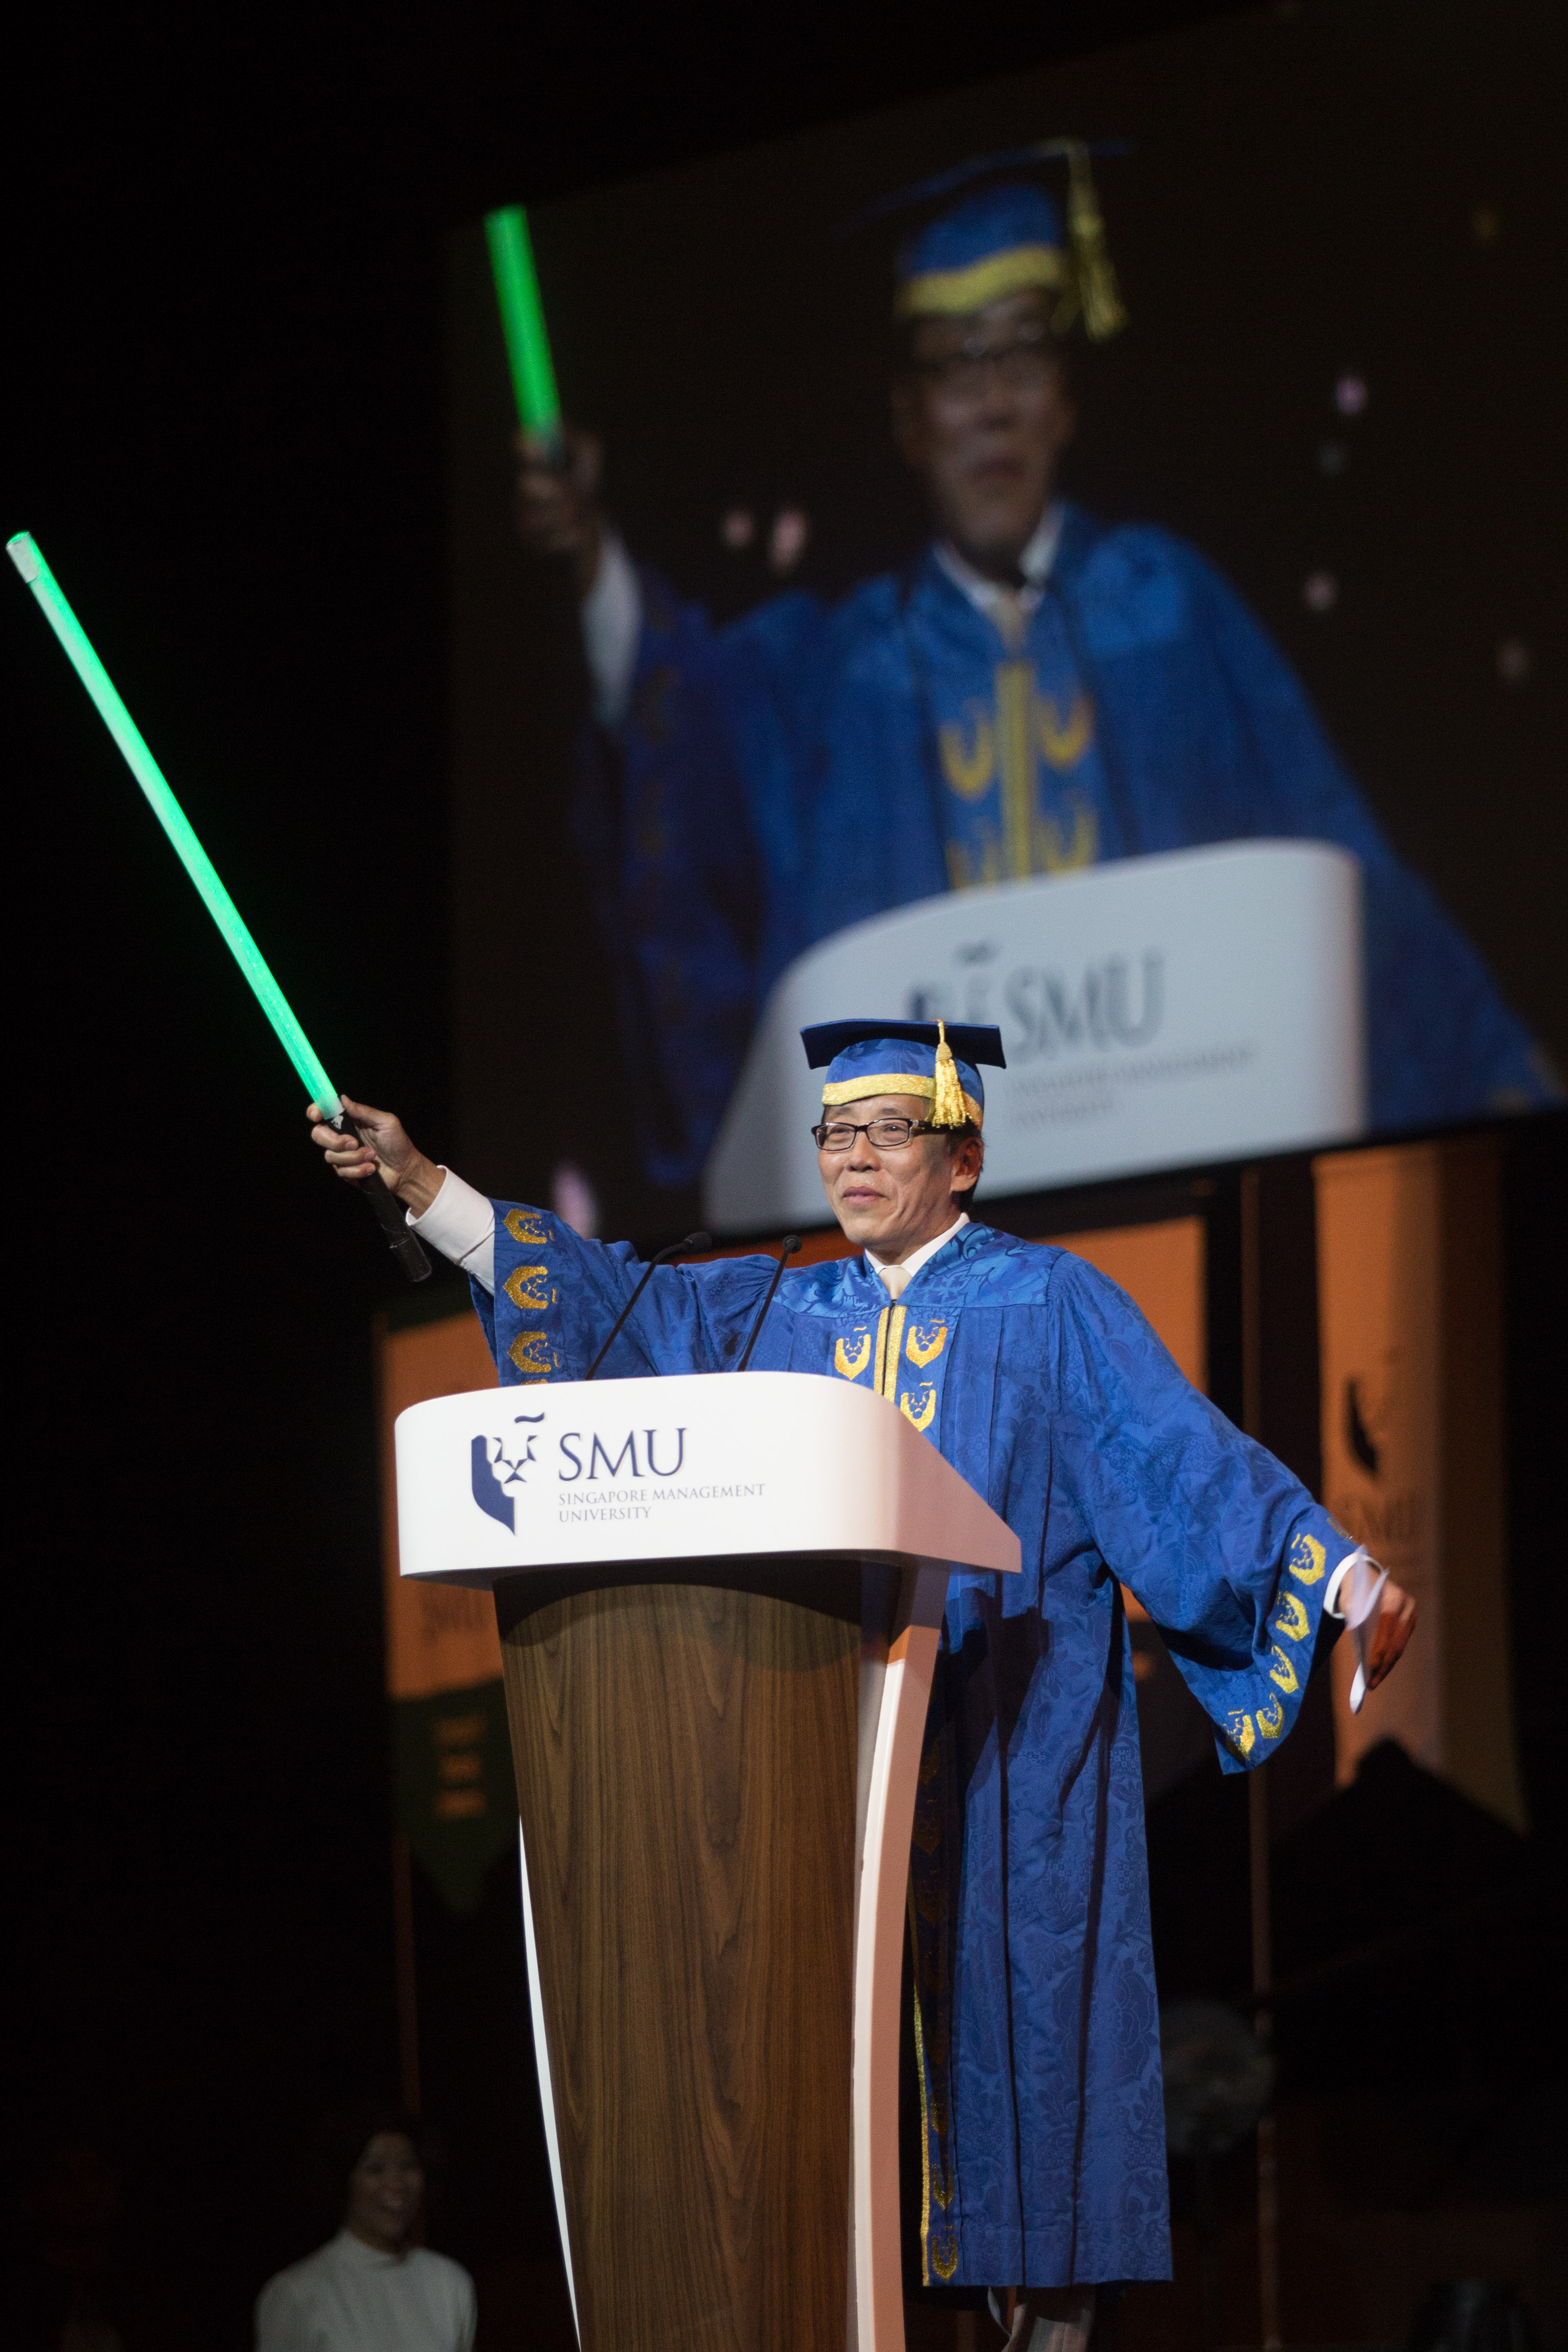 SMU Convocation 2014: Mr Ho Kwon Ping, Chairman of SMU Board of Trustees, brandishes a lightsaber during his opening address, to rapturous applause.